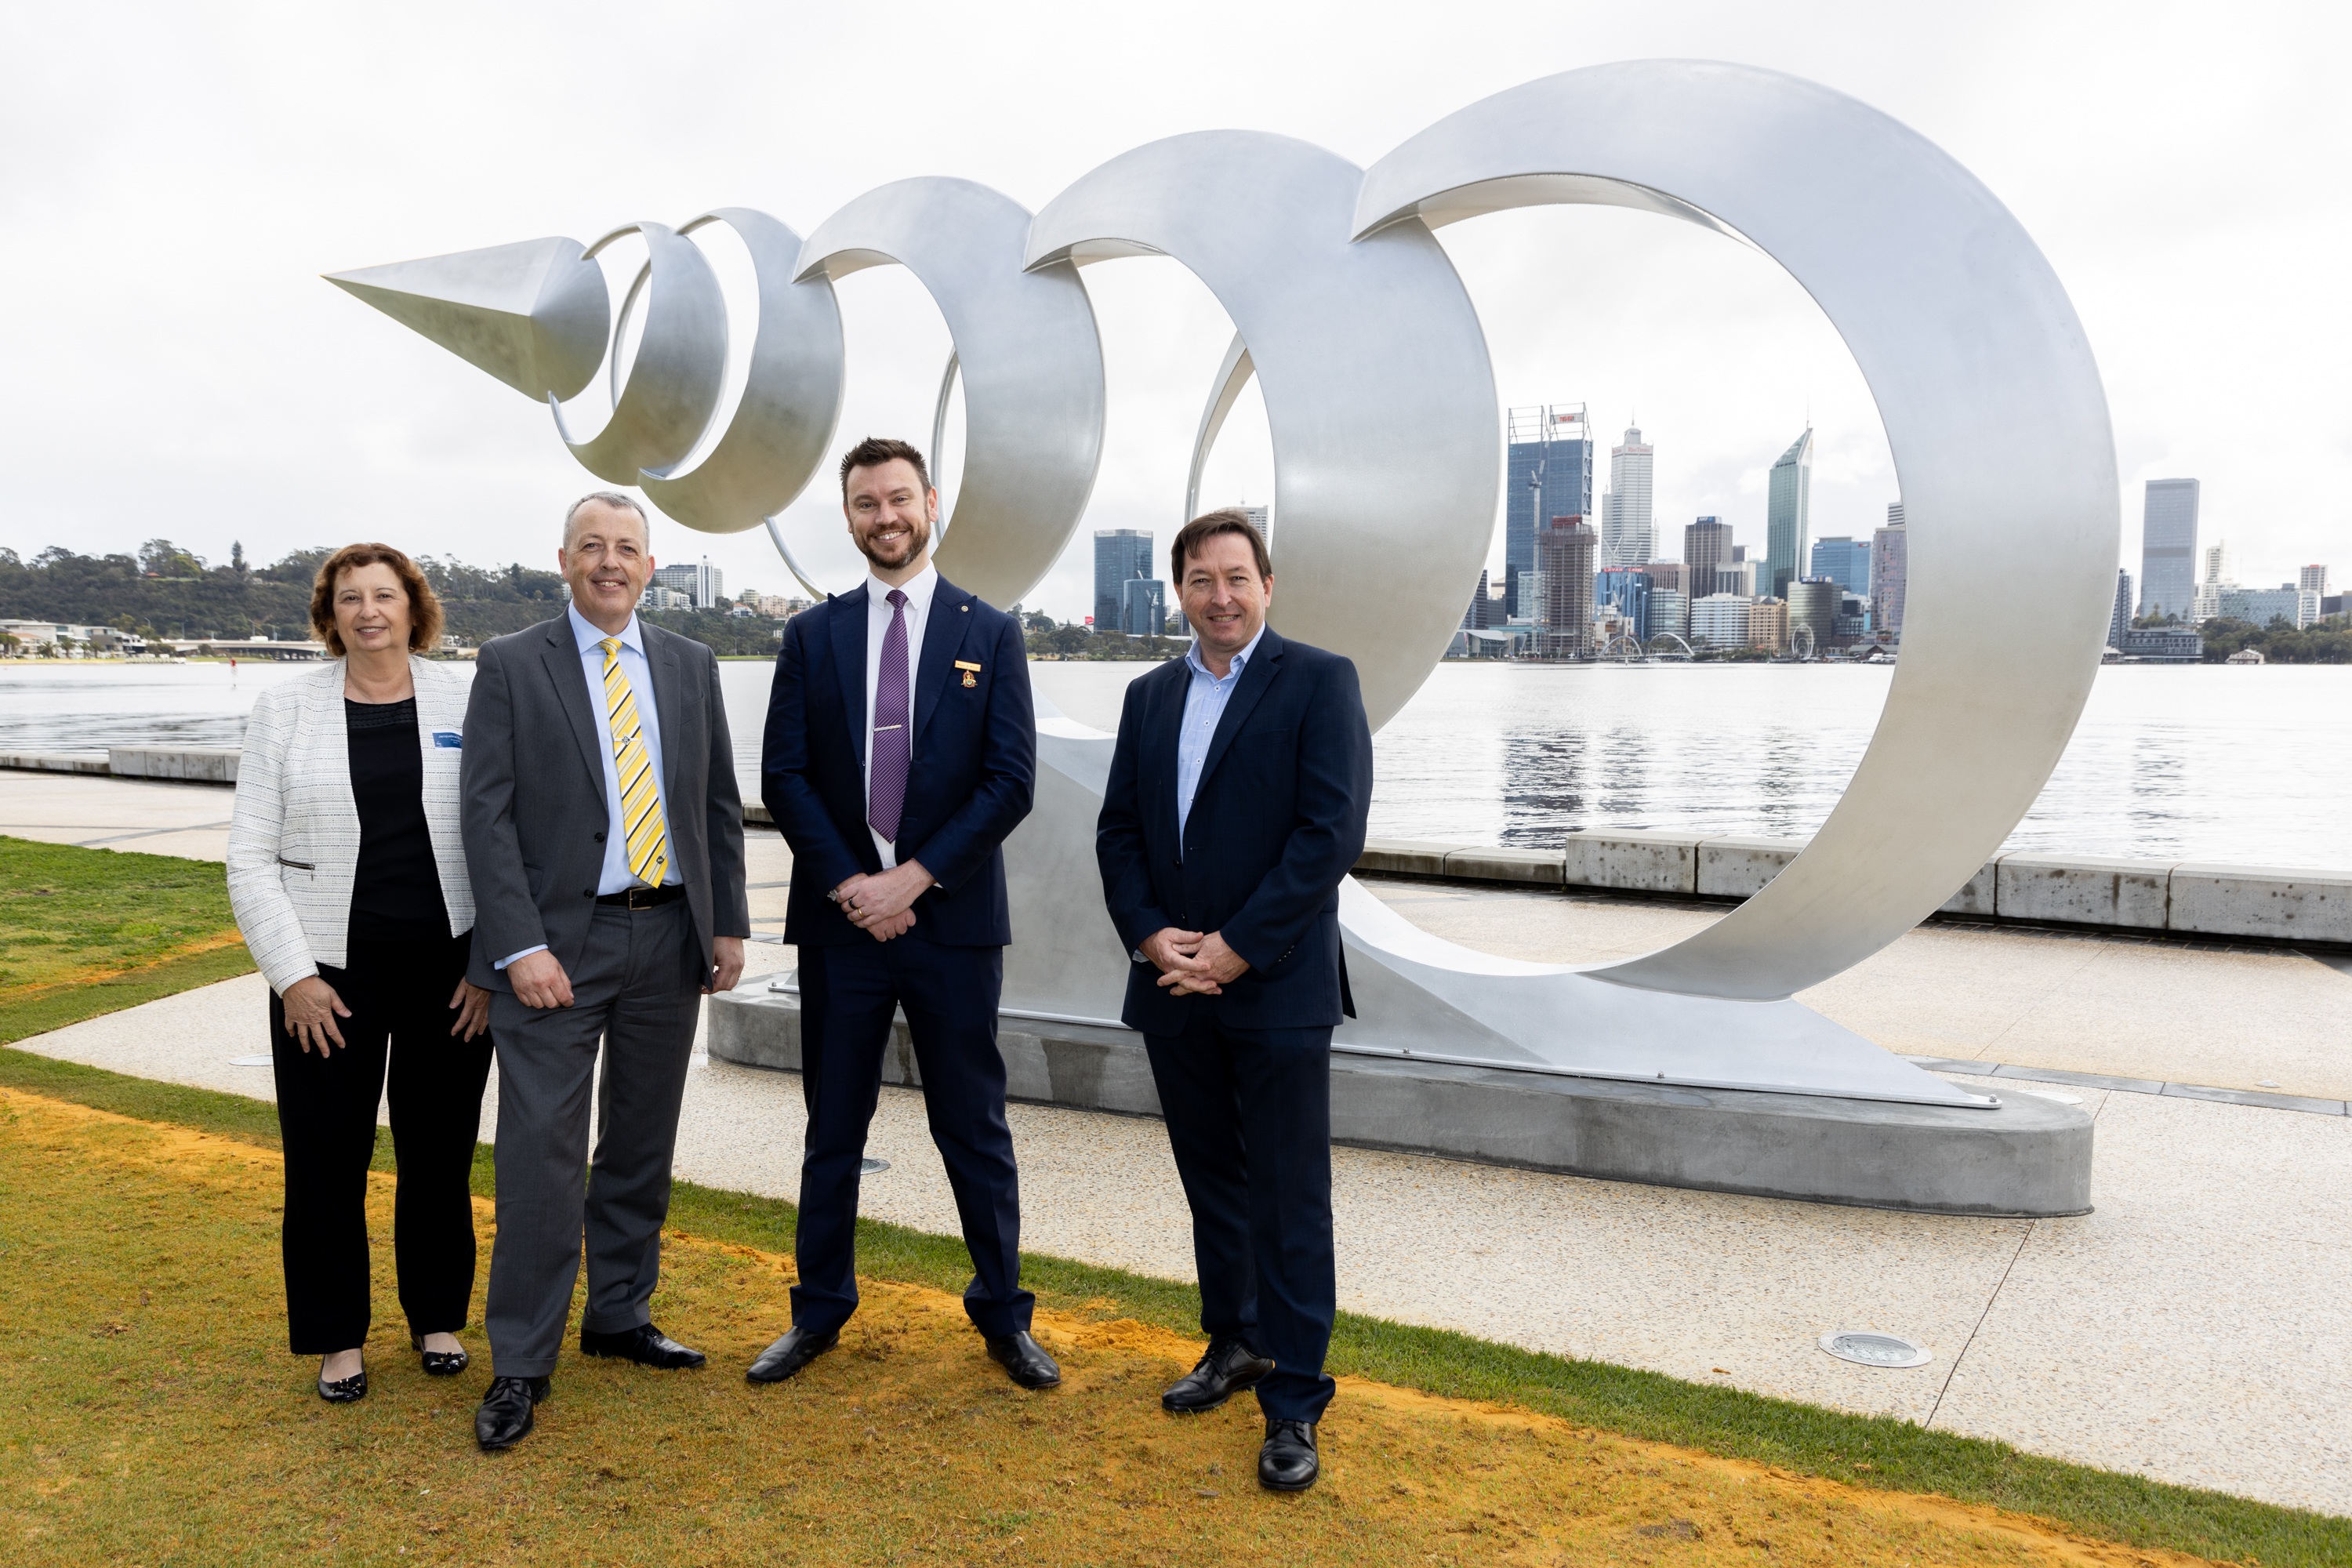 RAC President Jacqueline Ronchi, RAC Group Executive Robert Slocombe, City of South Perth Mayor Greg Milner and City of South Perth CEO Mike Bradford standing in front of the R/evolve sculpture on the South Perth foreshore